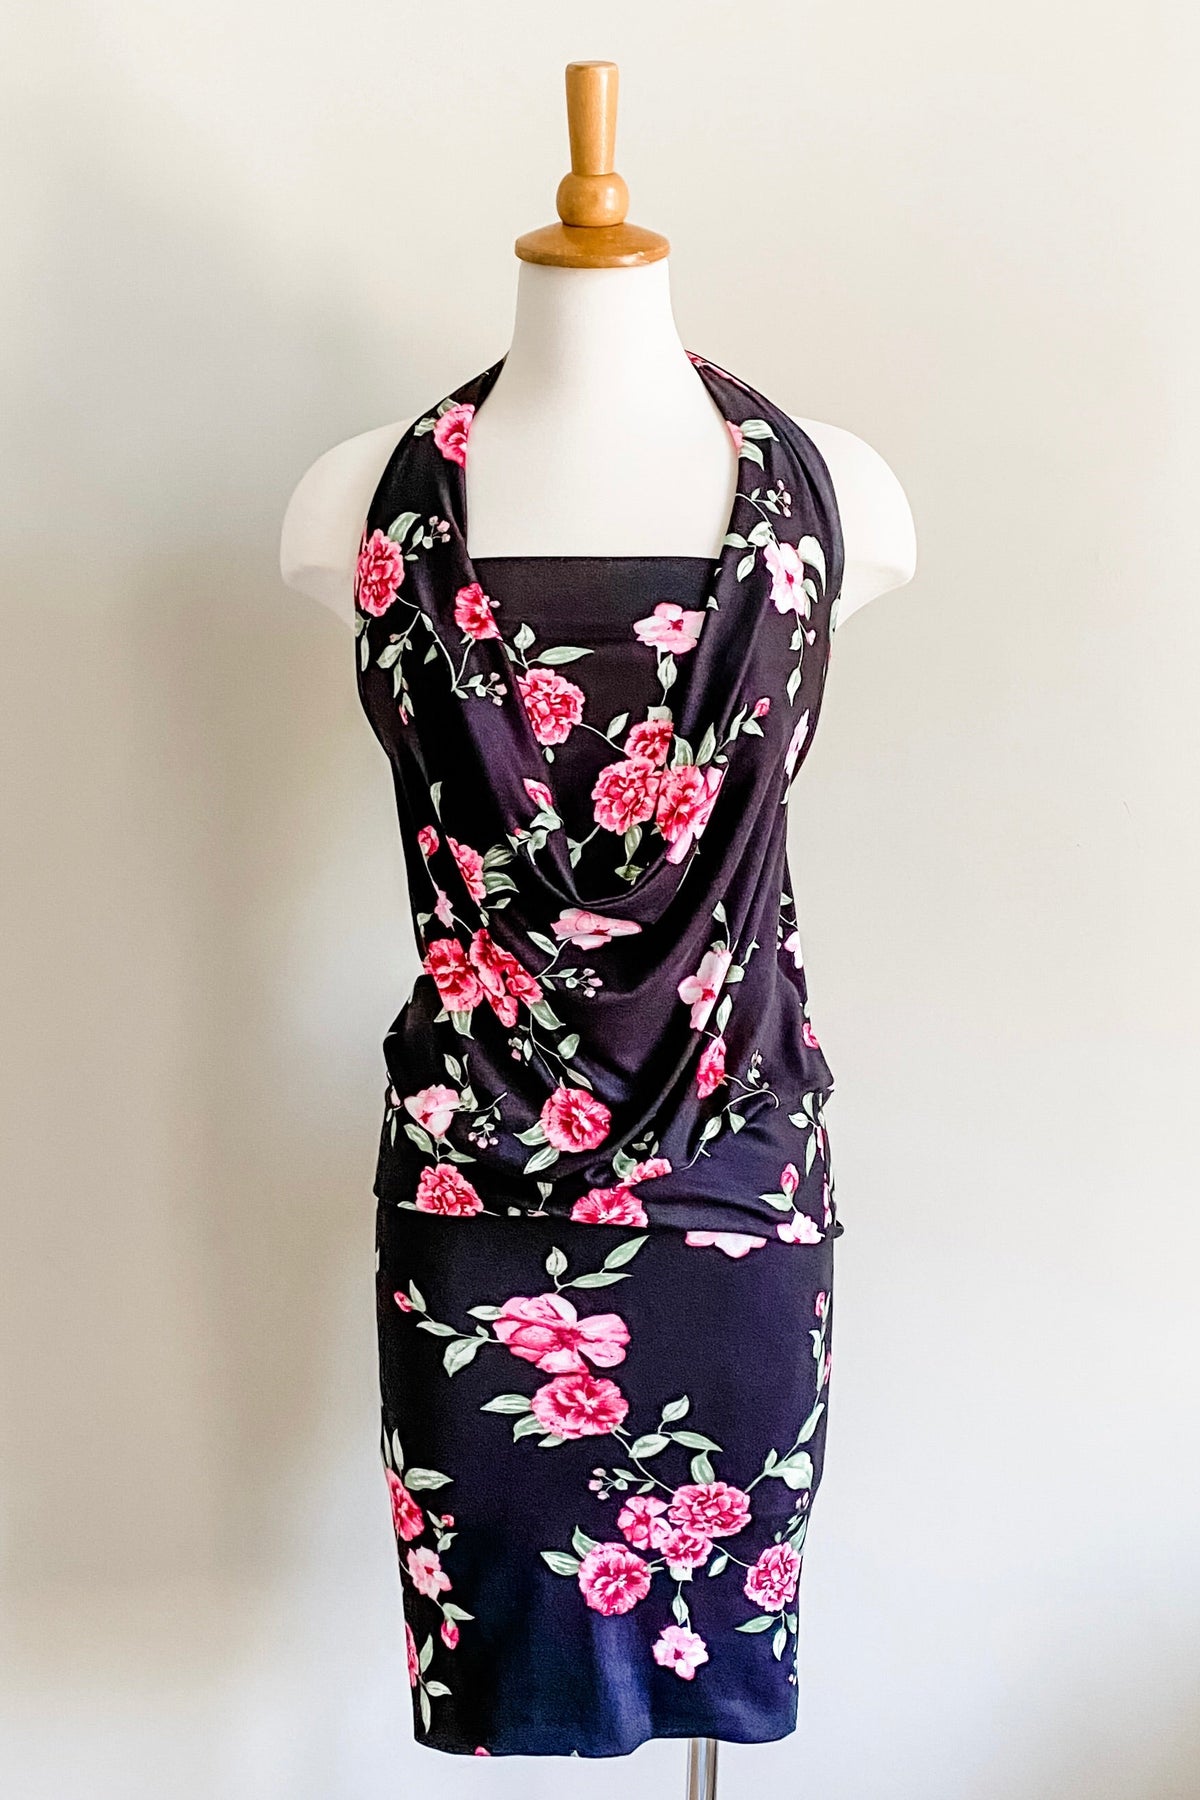 Diane Kroe One-4-All Top (Black Pink Floral) - Warm Weather Capsule Collection